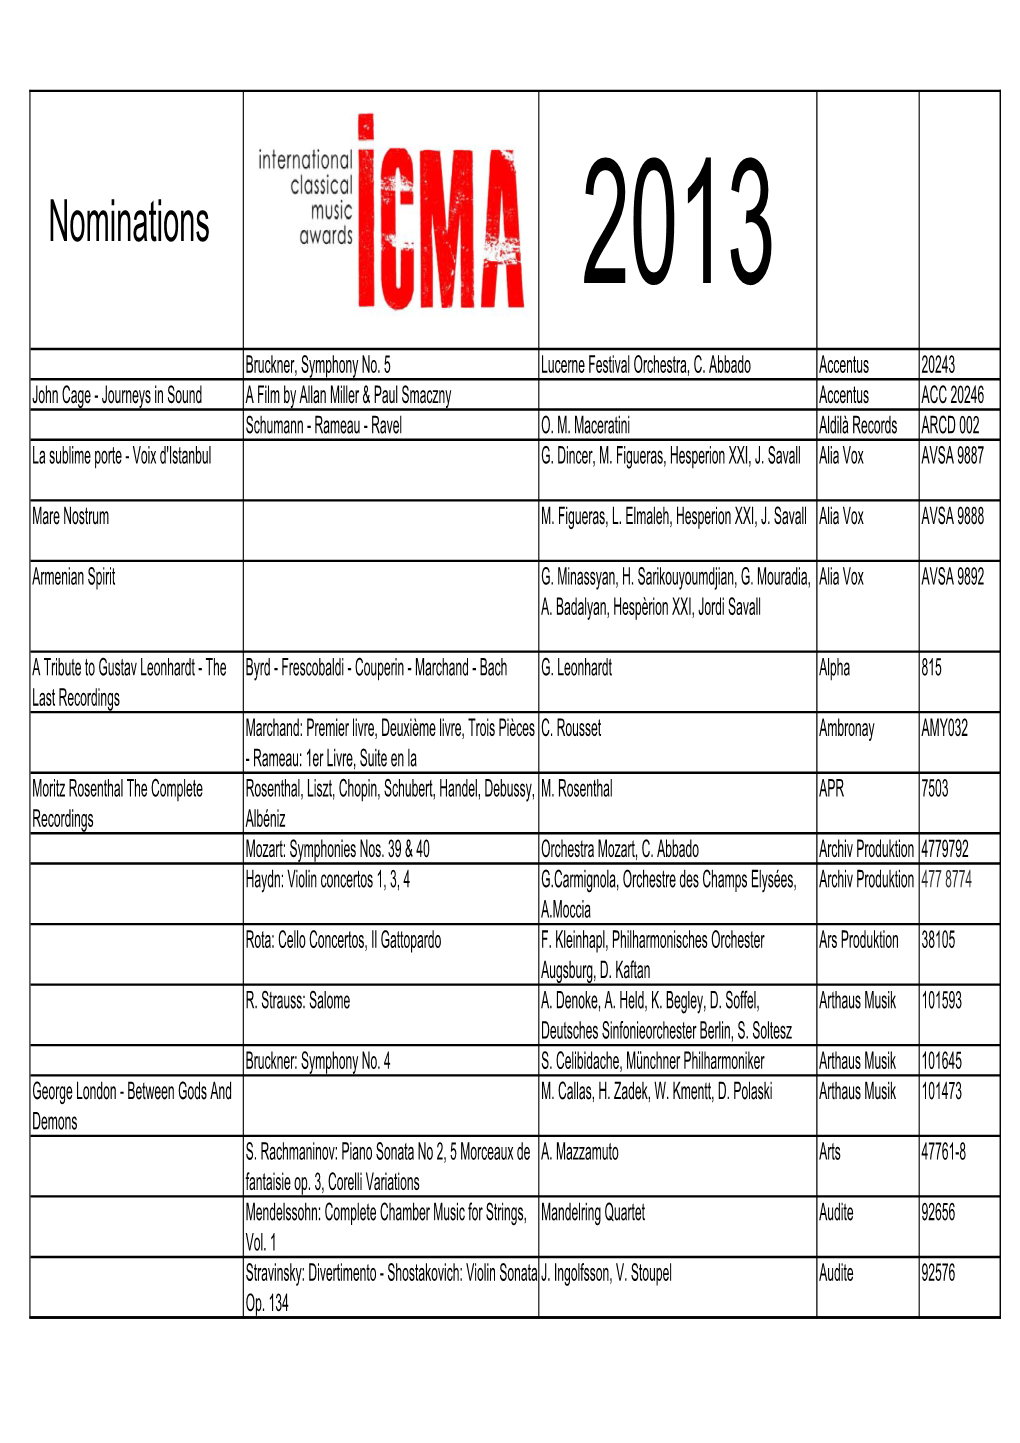 ICMA Nominations 2013 Sorted by Labels &